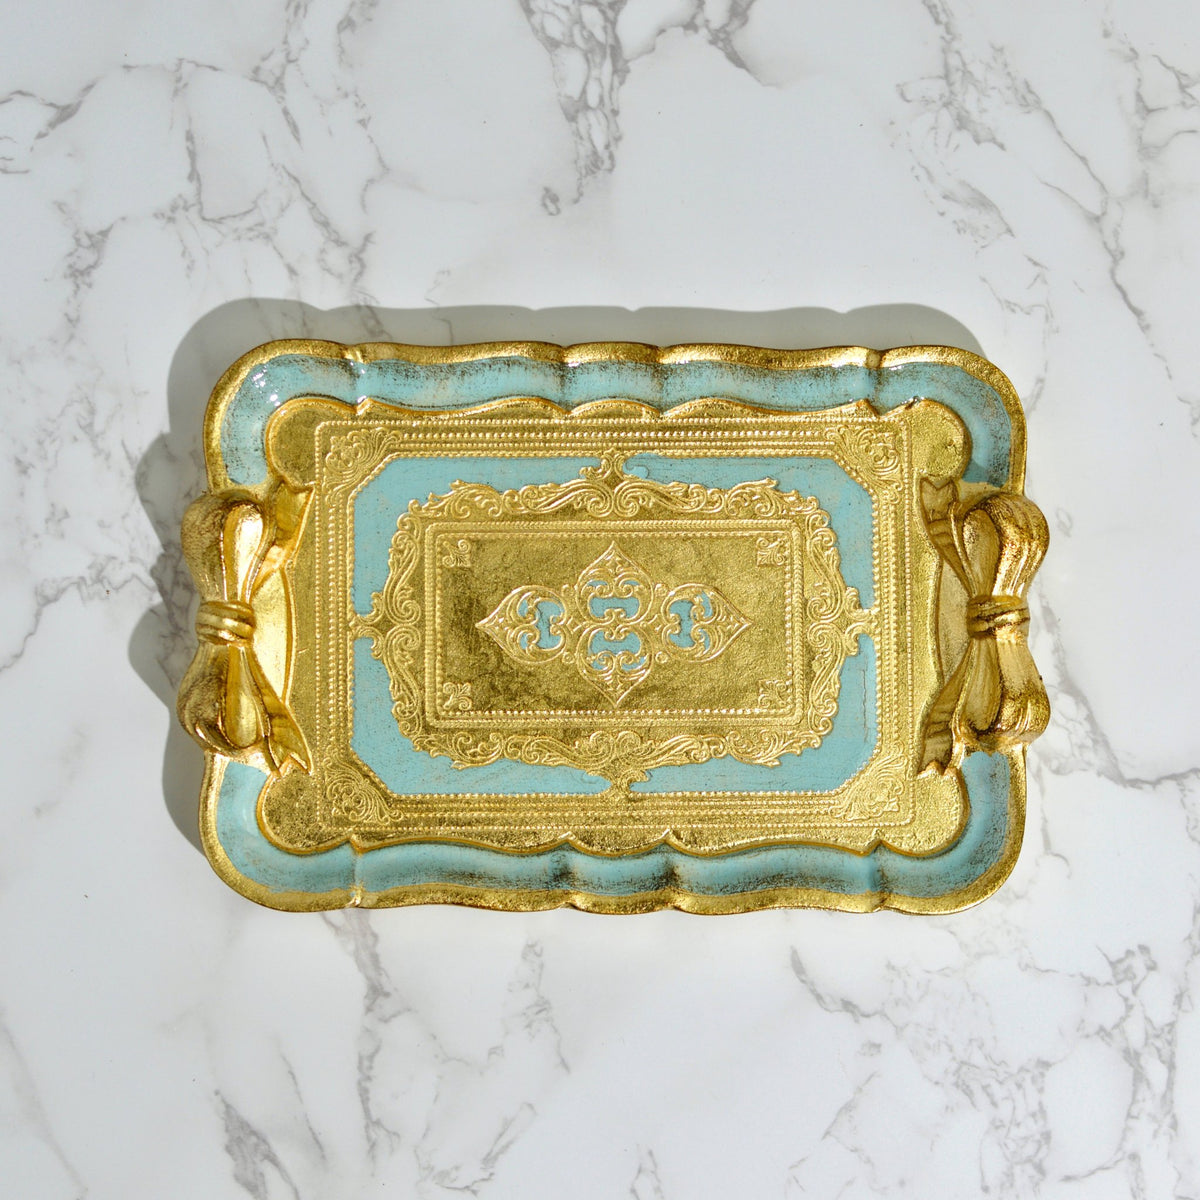 Florentine Carved Gilded Wood Tray with Bow, Made in Italy - My Italian Decor